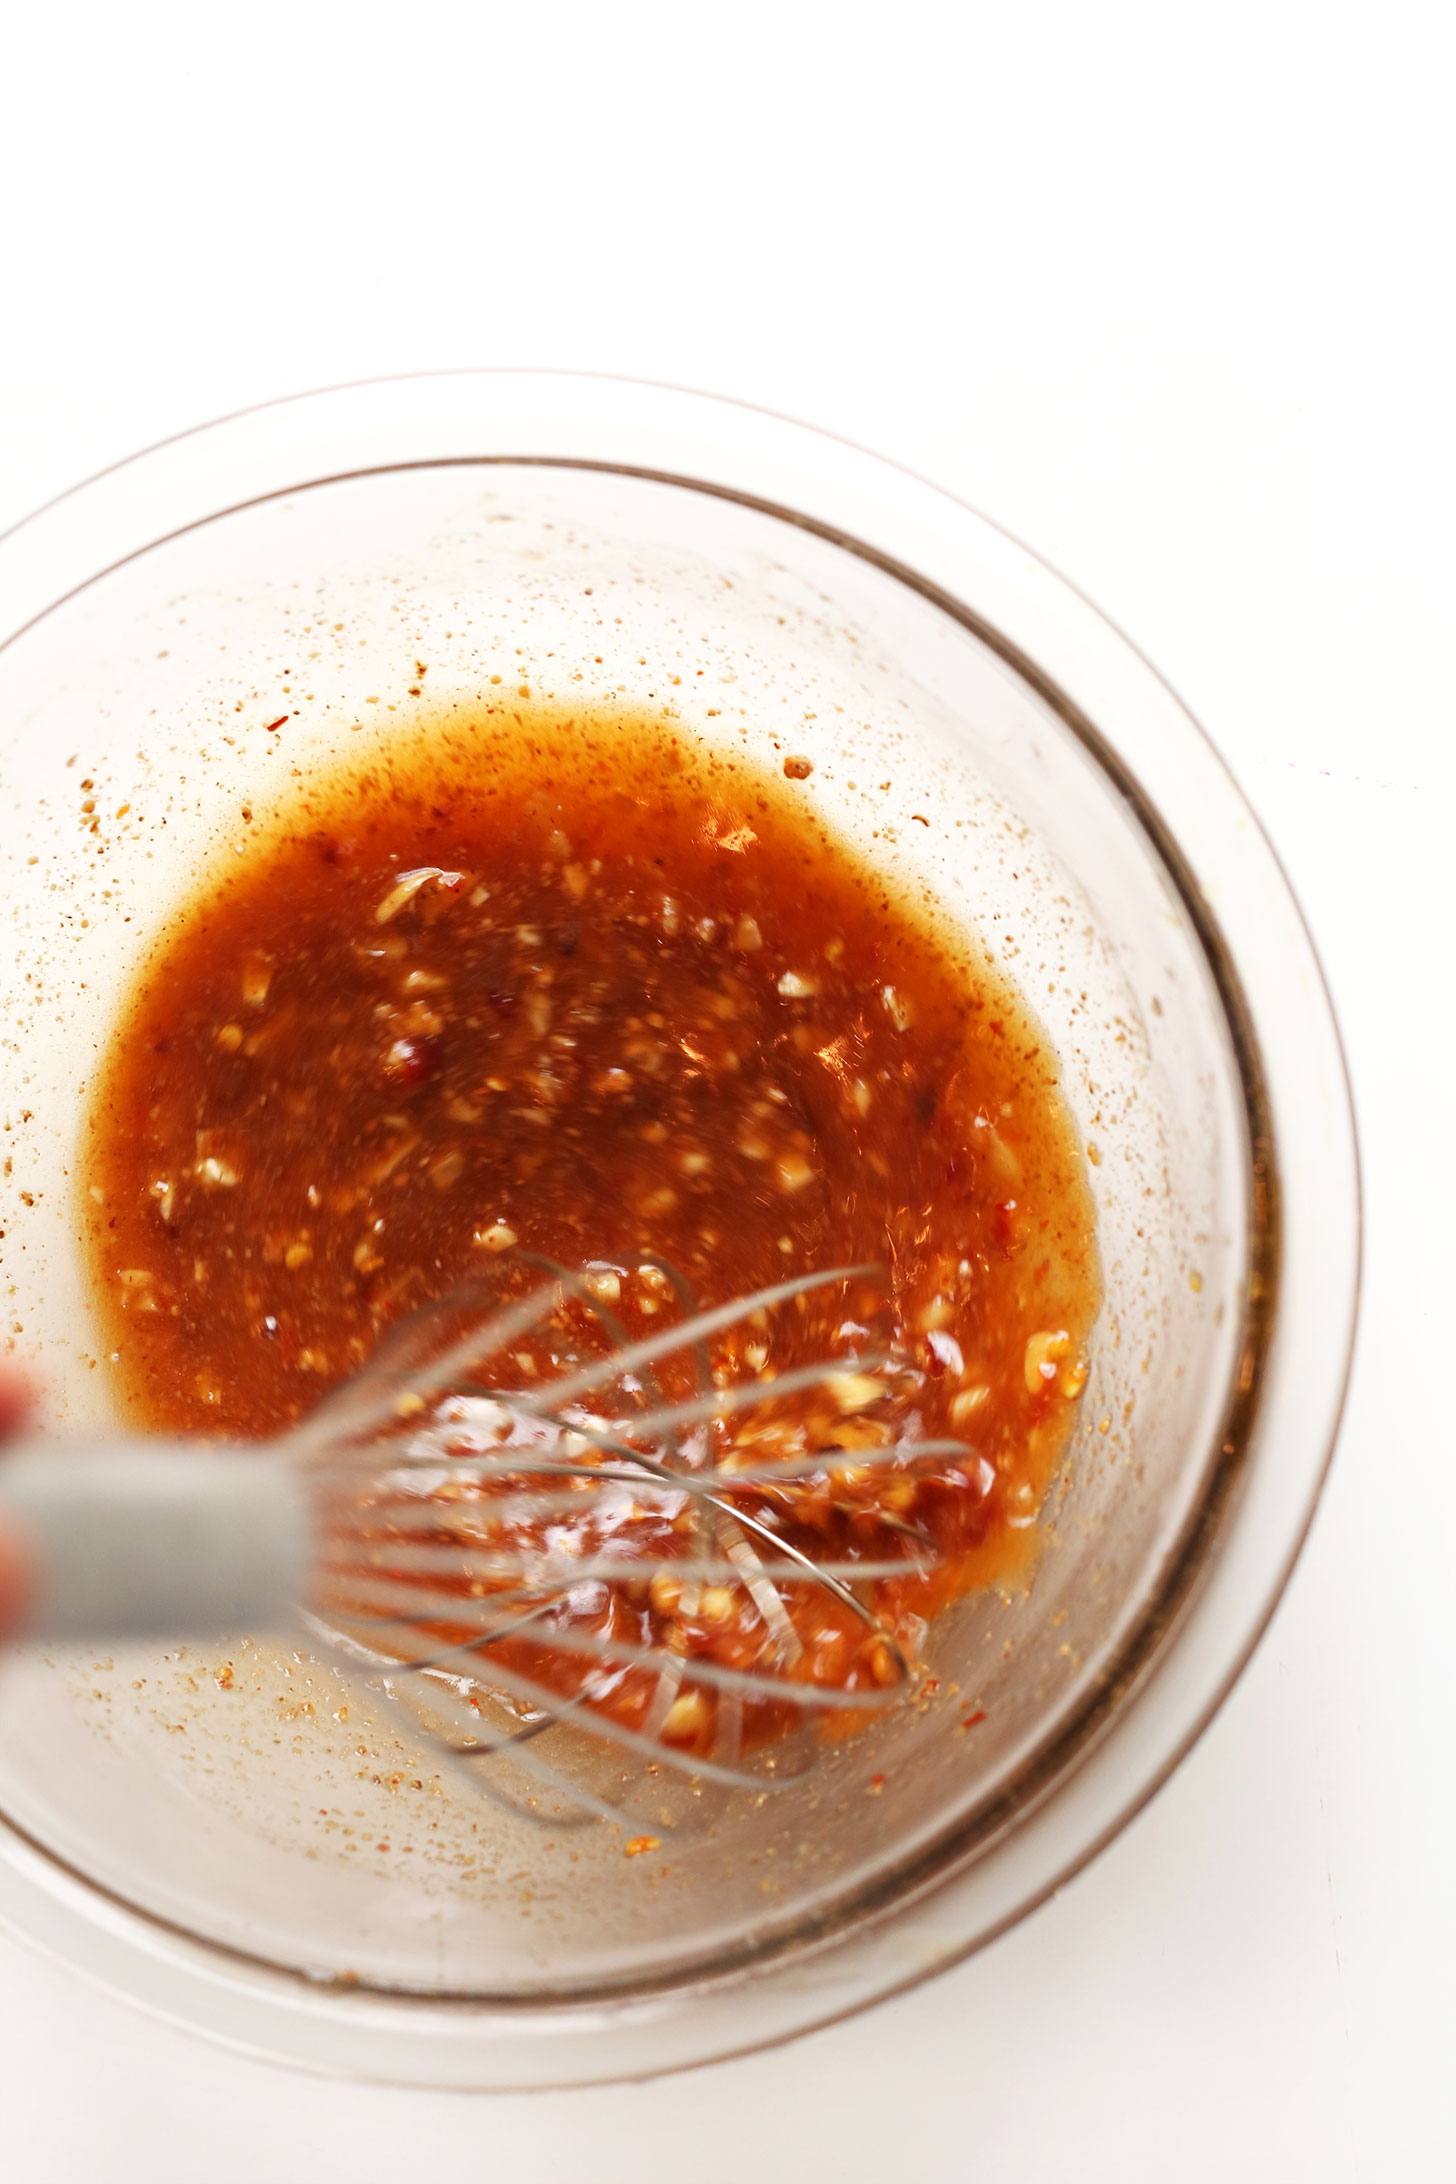 Whisking together an Asian-inspired dressing made with almond butter, tamari, and more